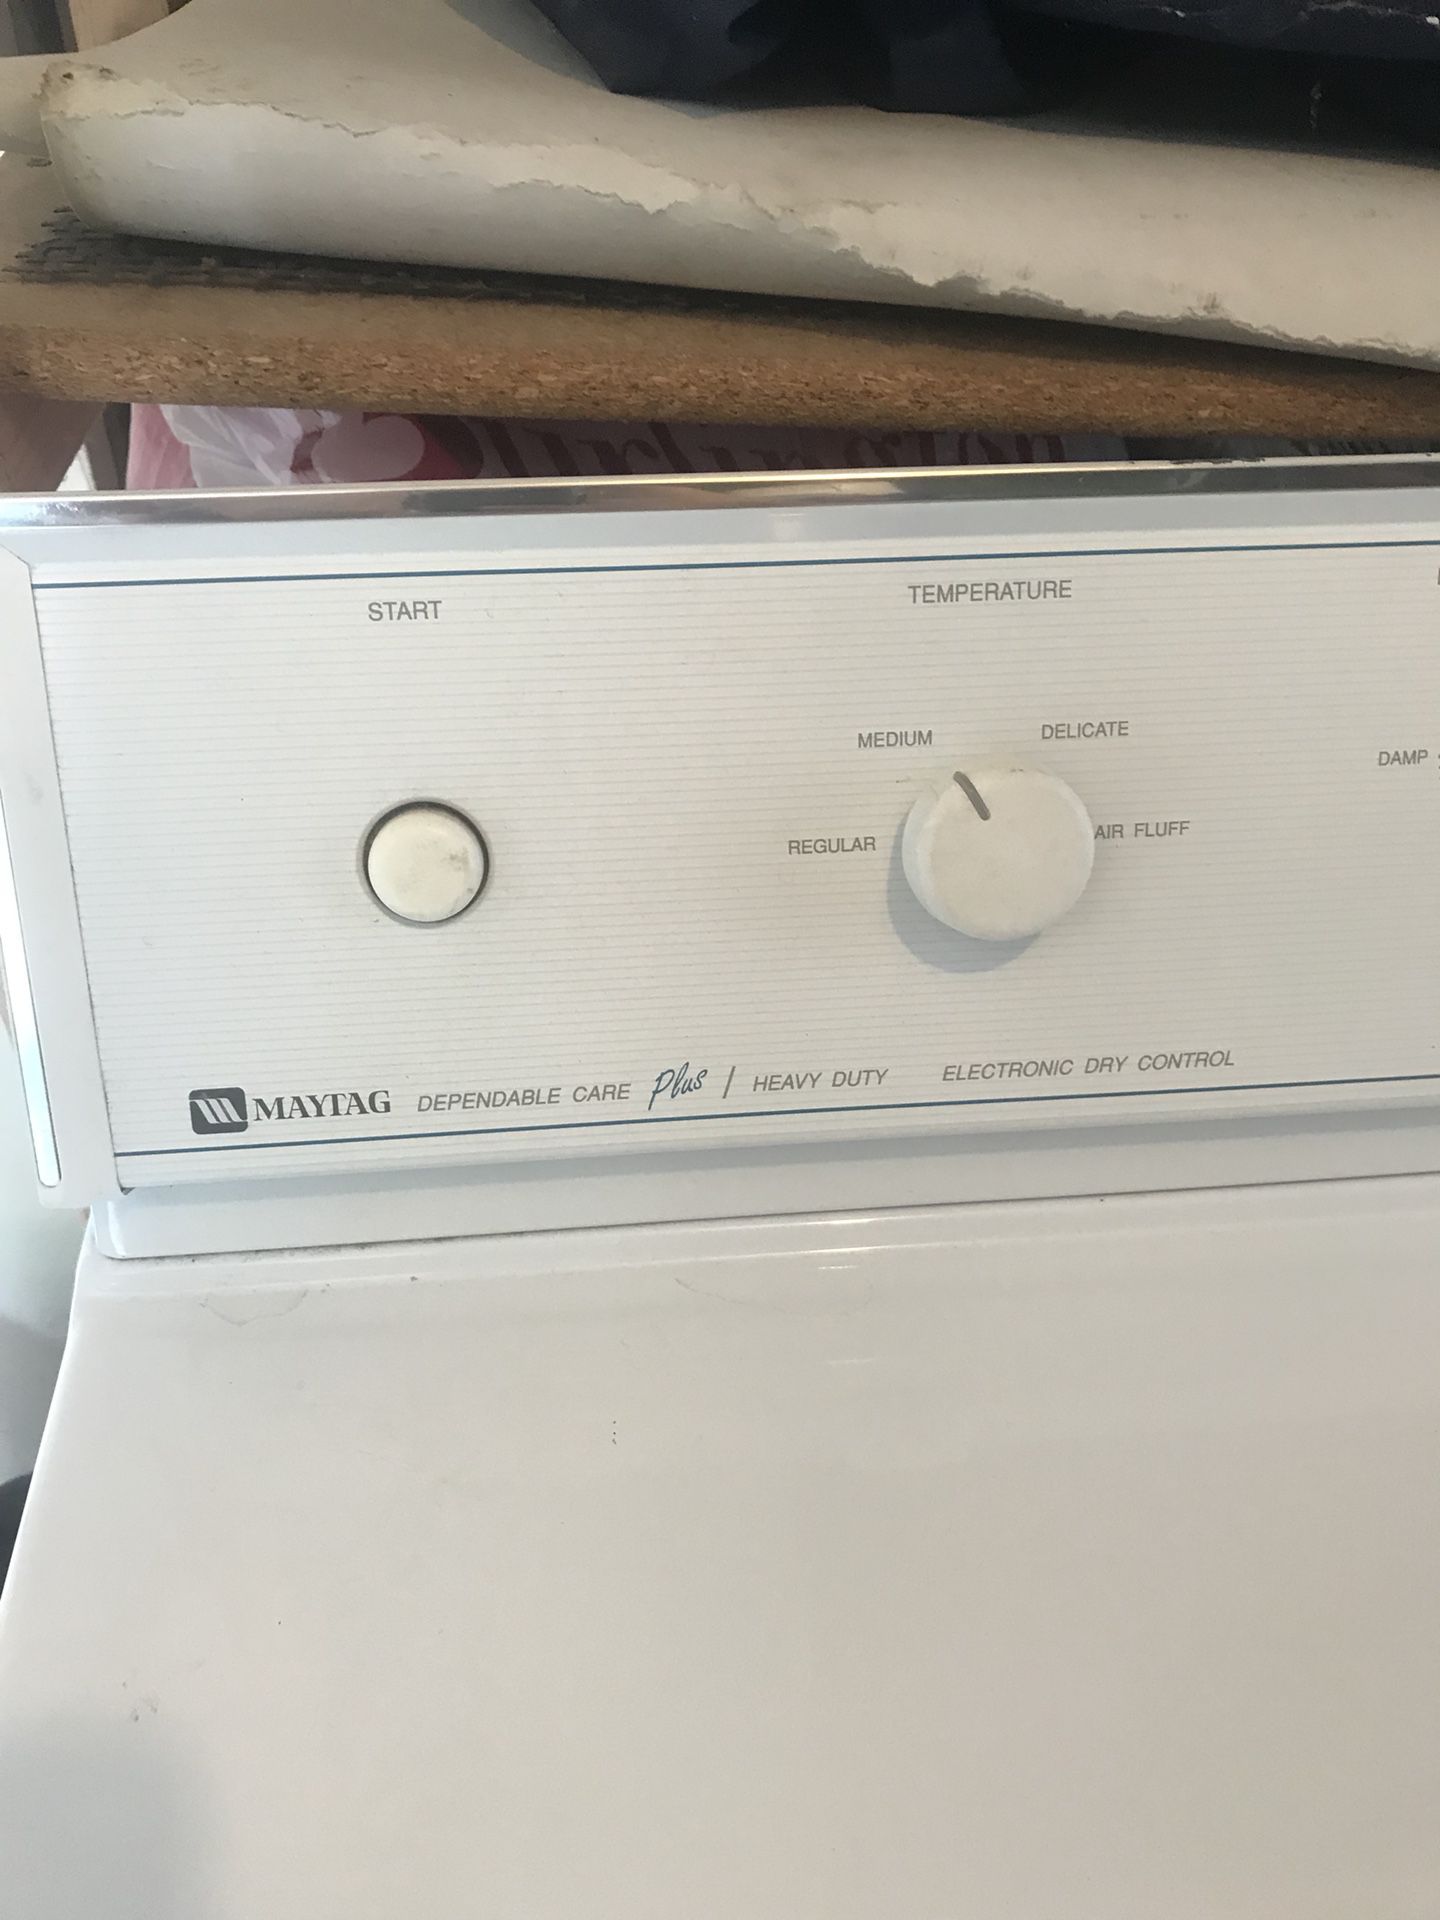 Maytag dependable care plus washer and gas dryer